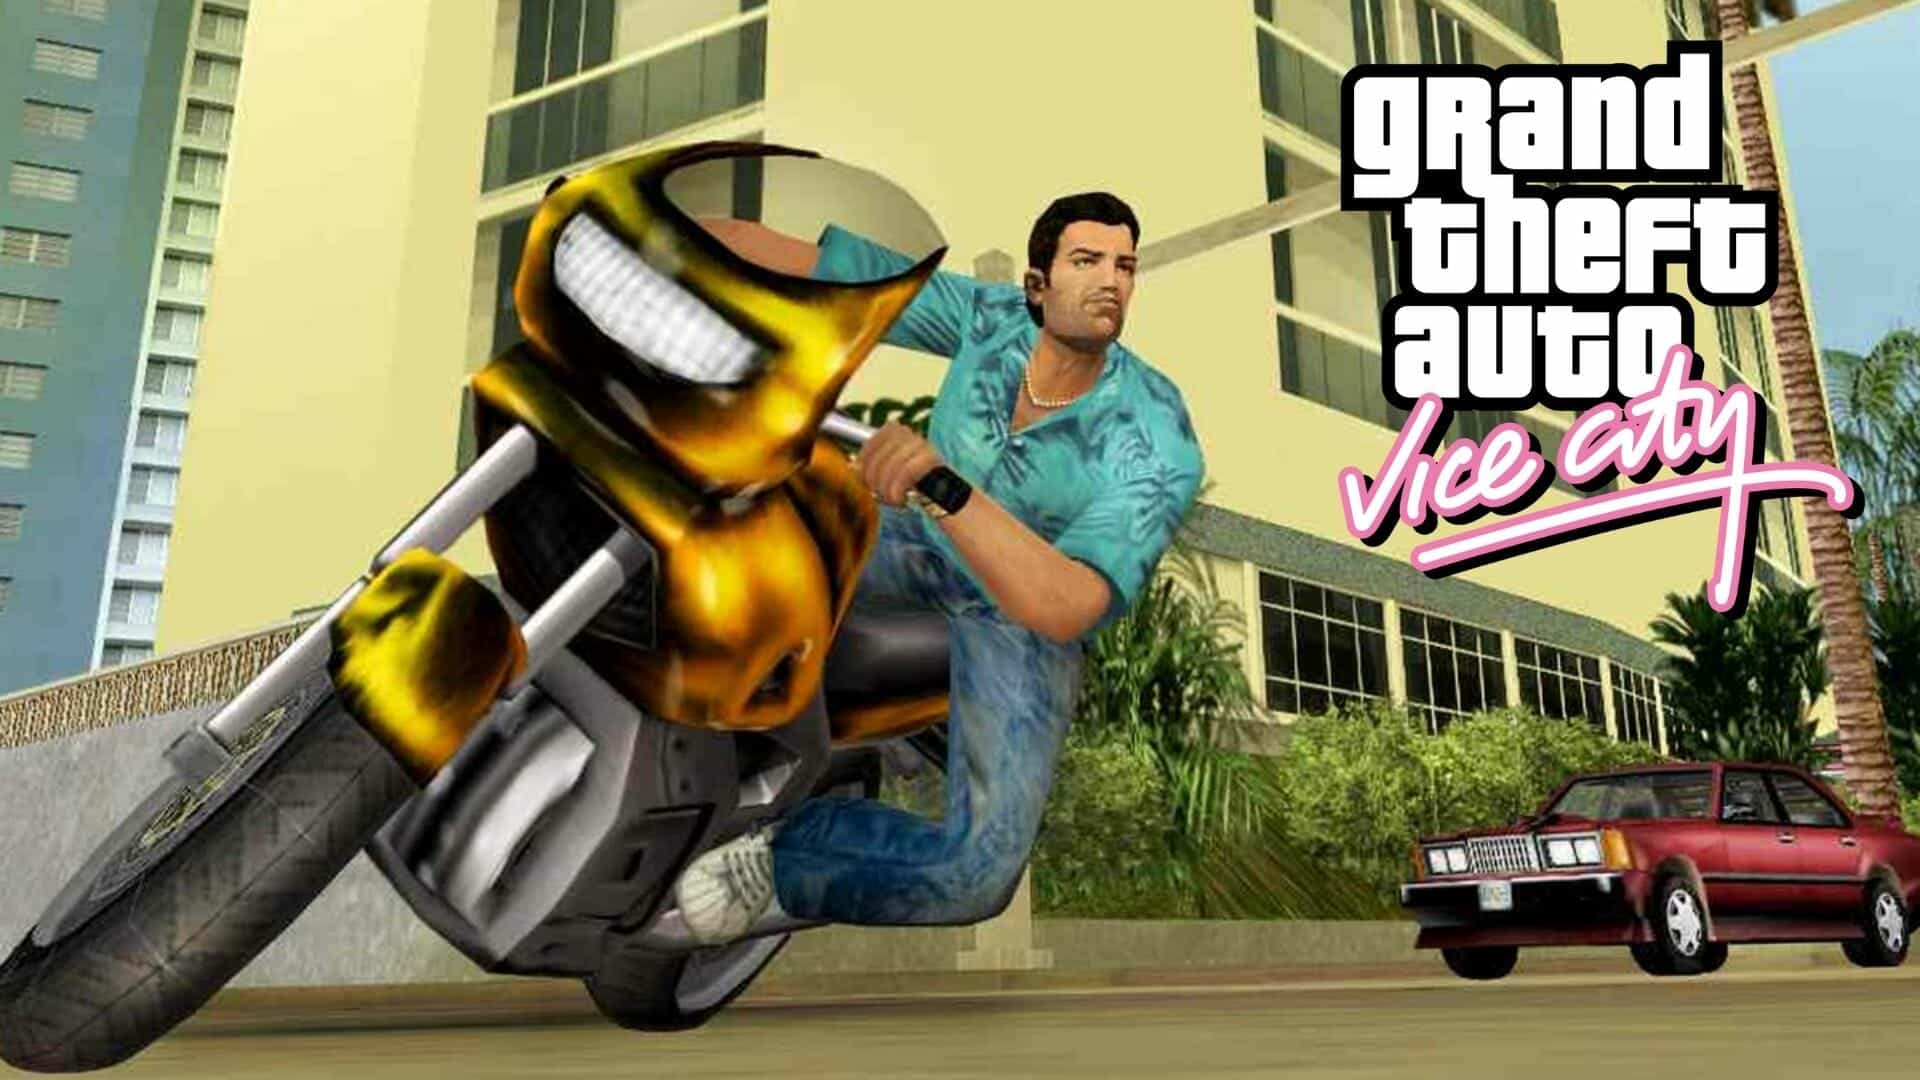 tommy vercetti riding a bike in vice city